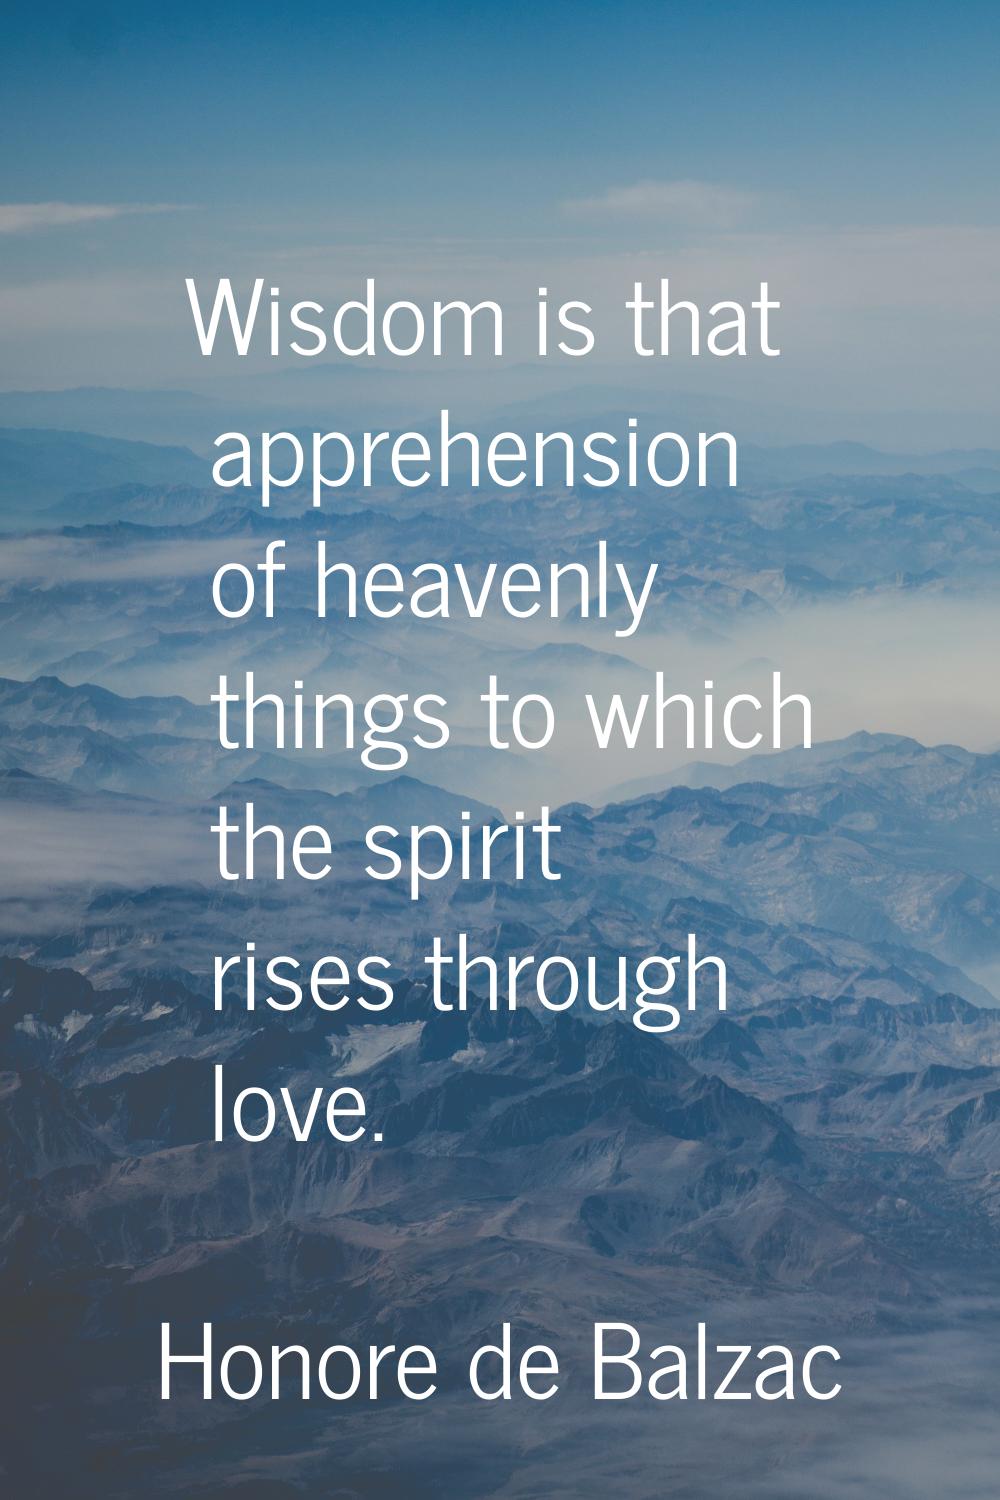 Wisdom is that apprehension of heavenly things to which the spirit rises through love.